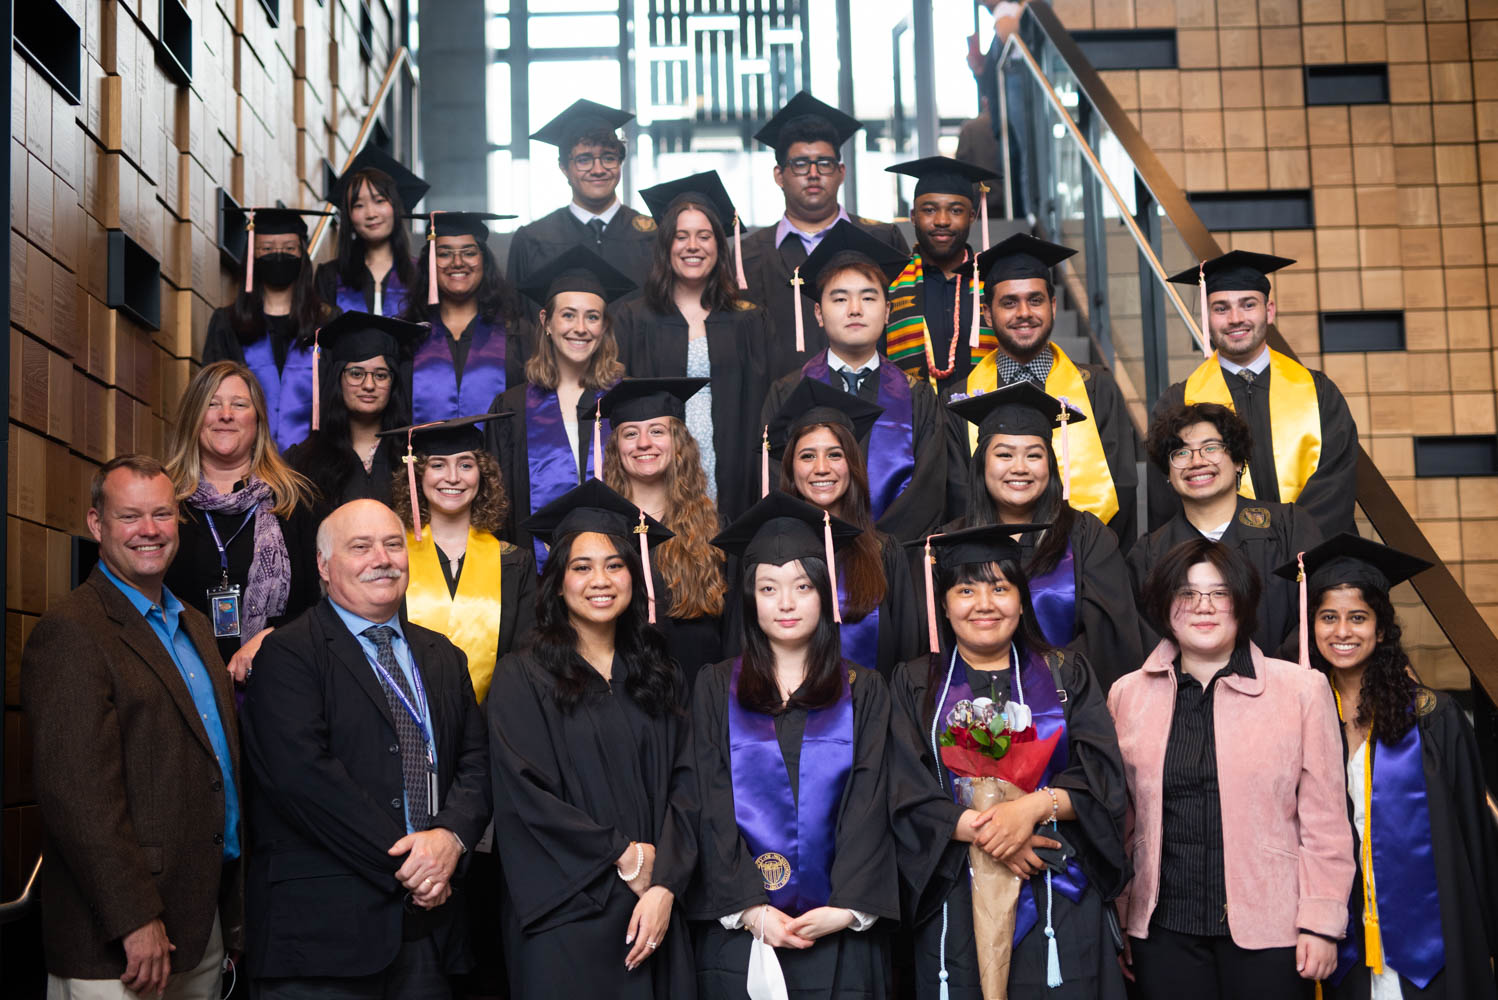 A group photo of DEOHS graduates standing on the steps of the Hans Rosling Center for Population Health.